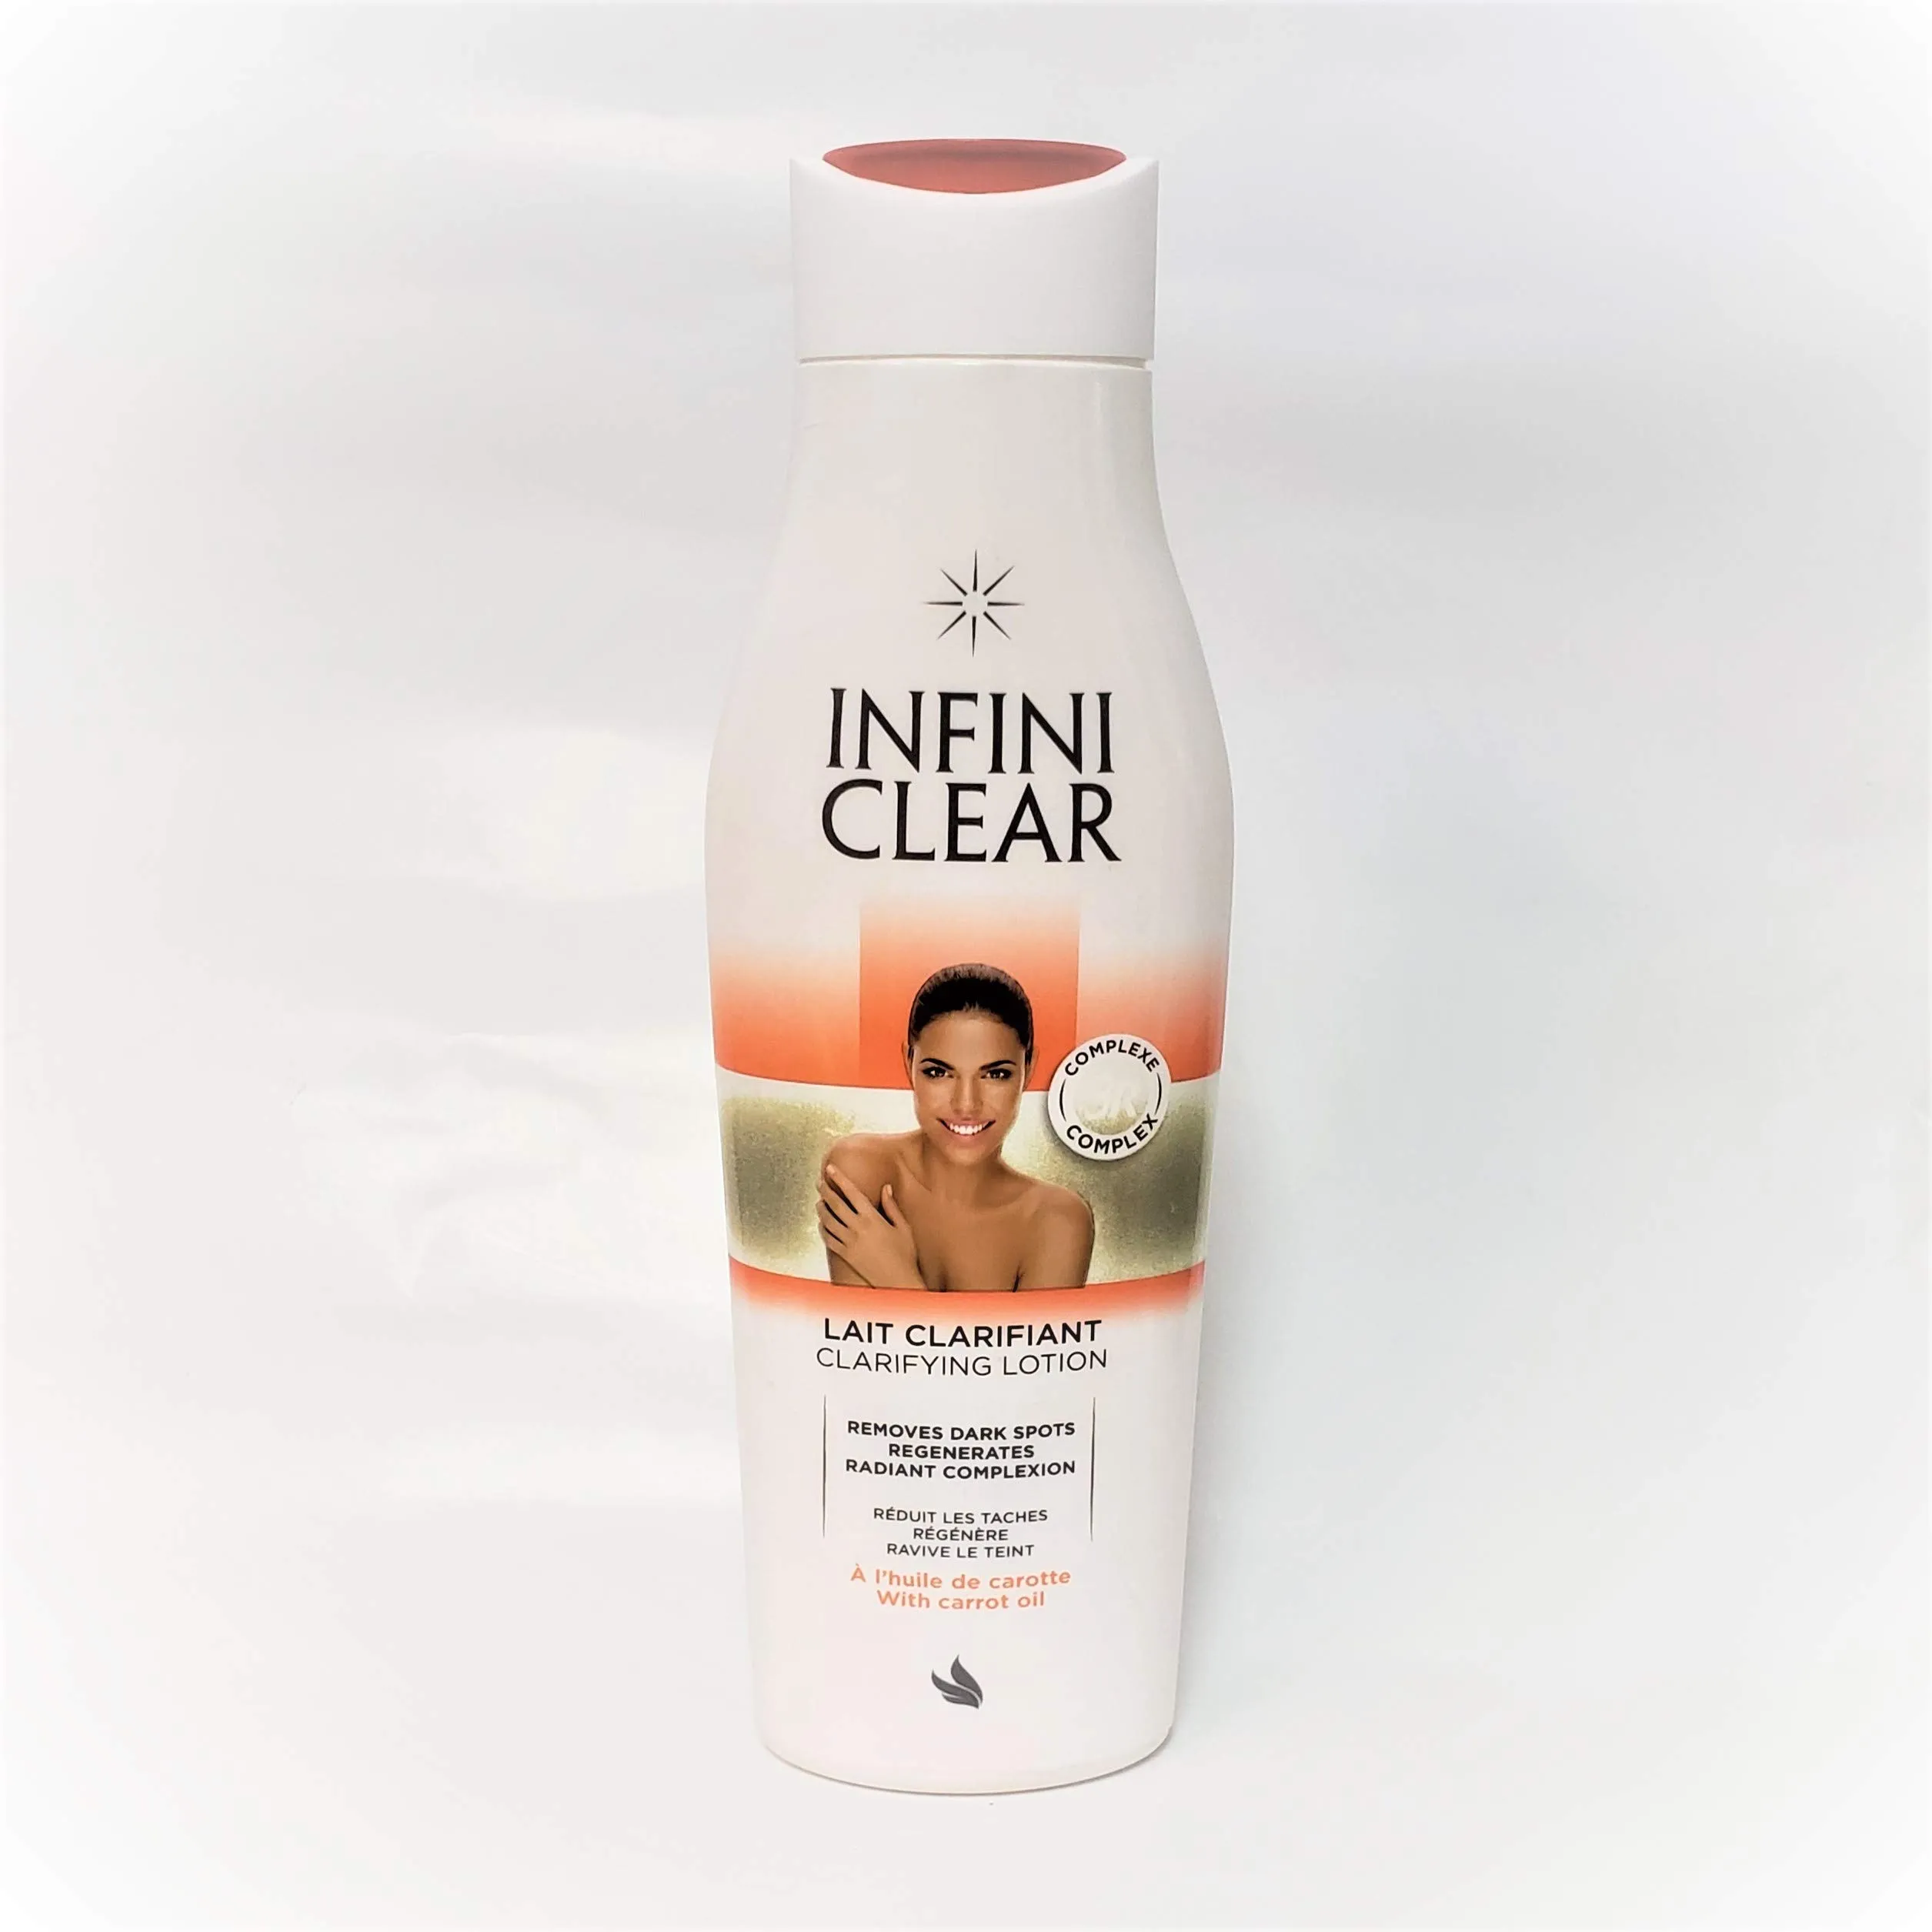 Infini Clear Lotion Review